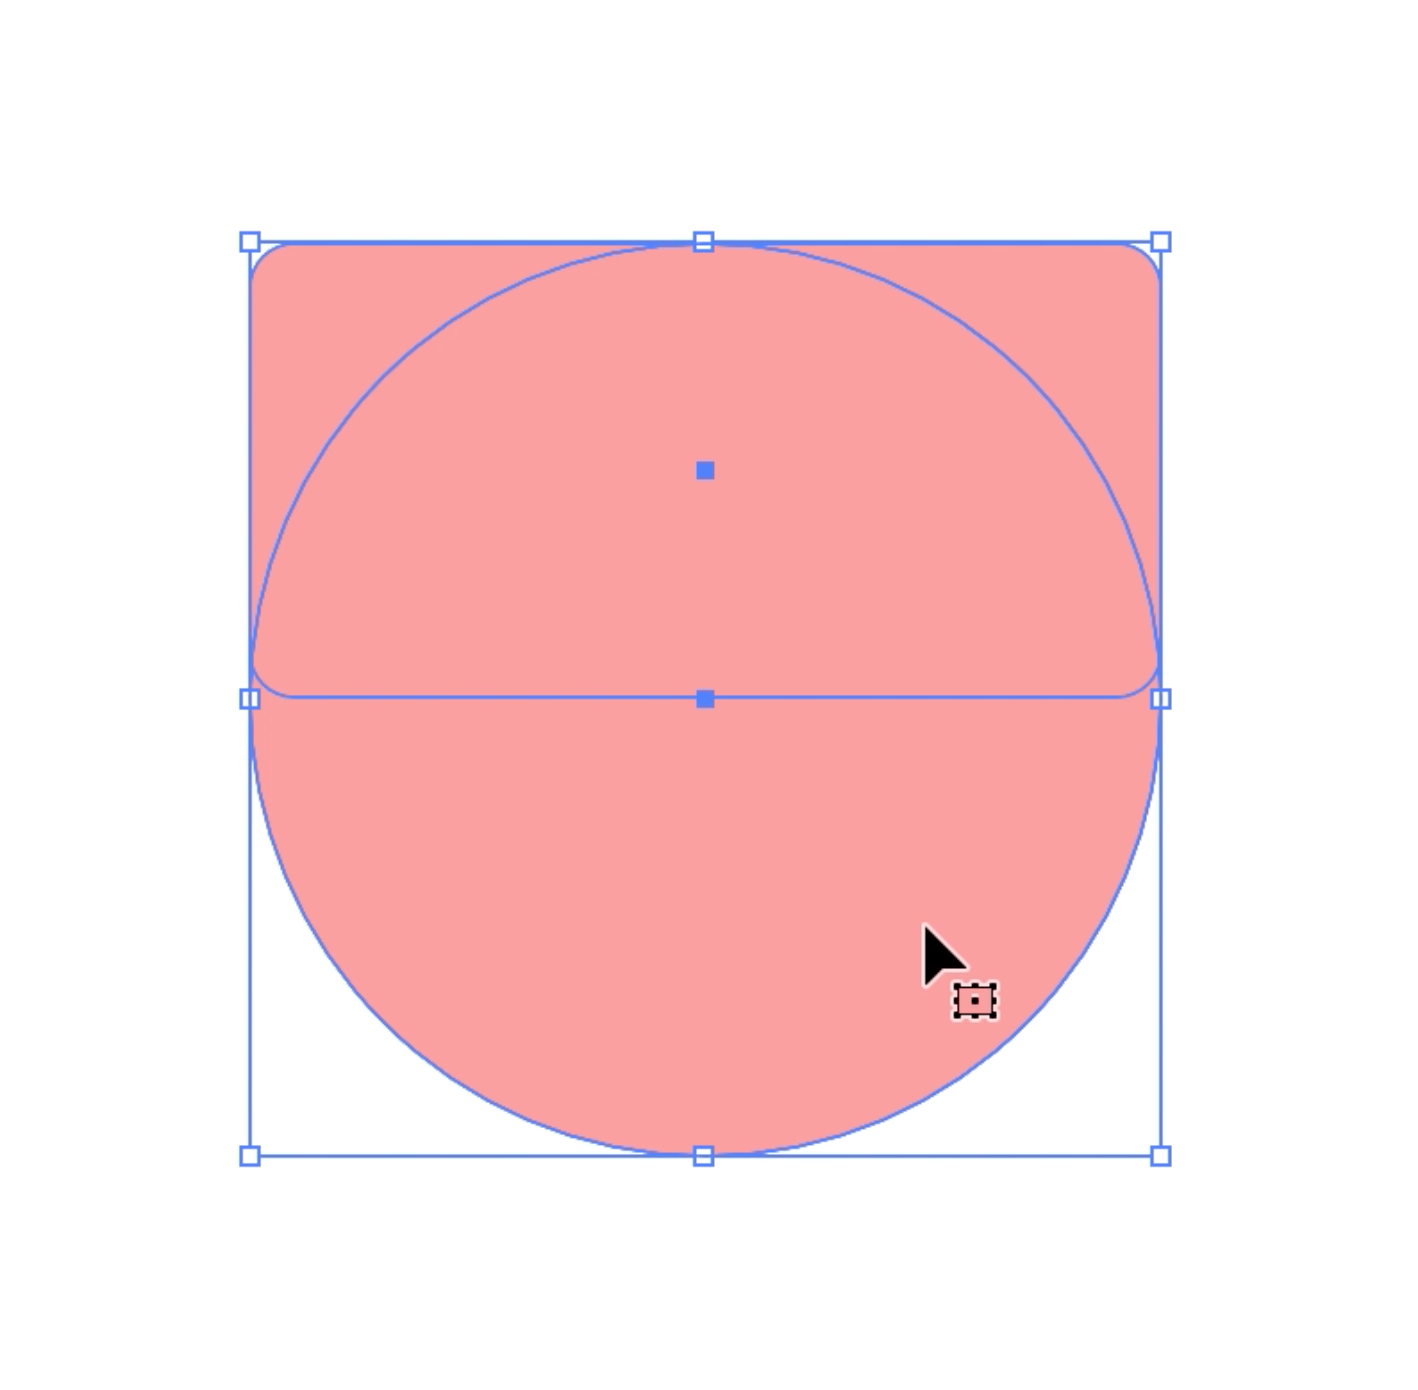 The rounded rectange is positioned on the upper half of the circle